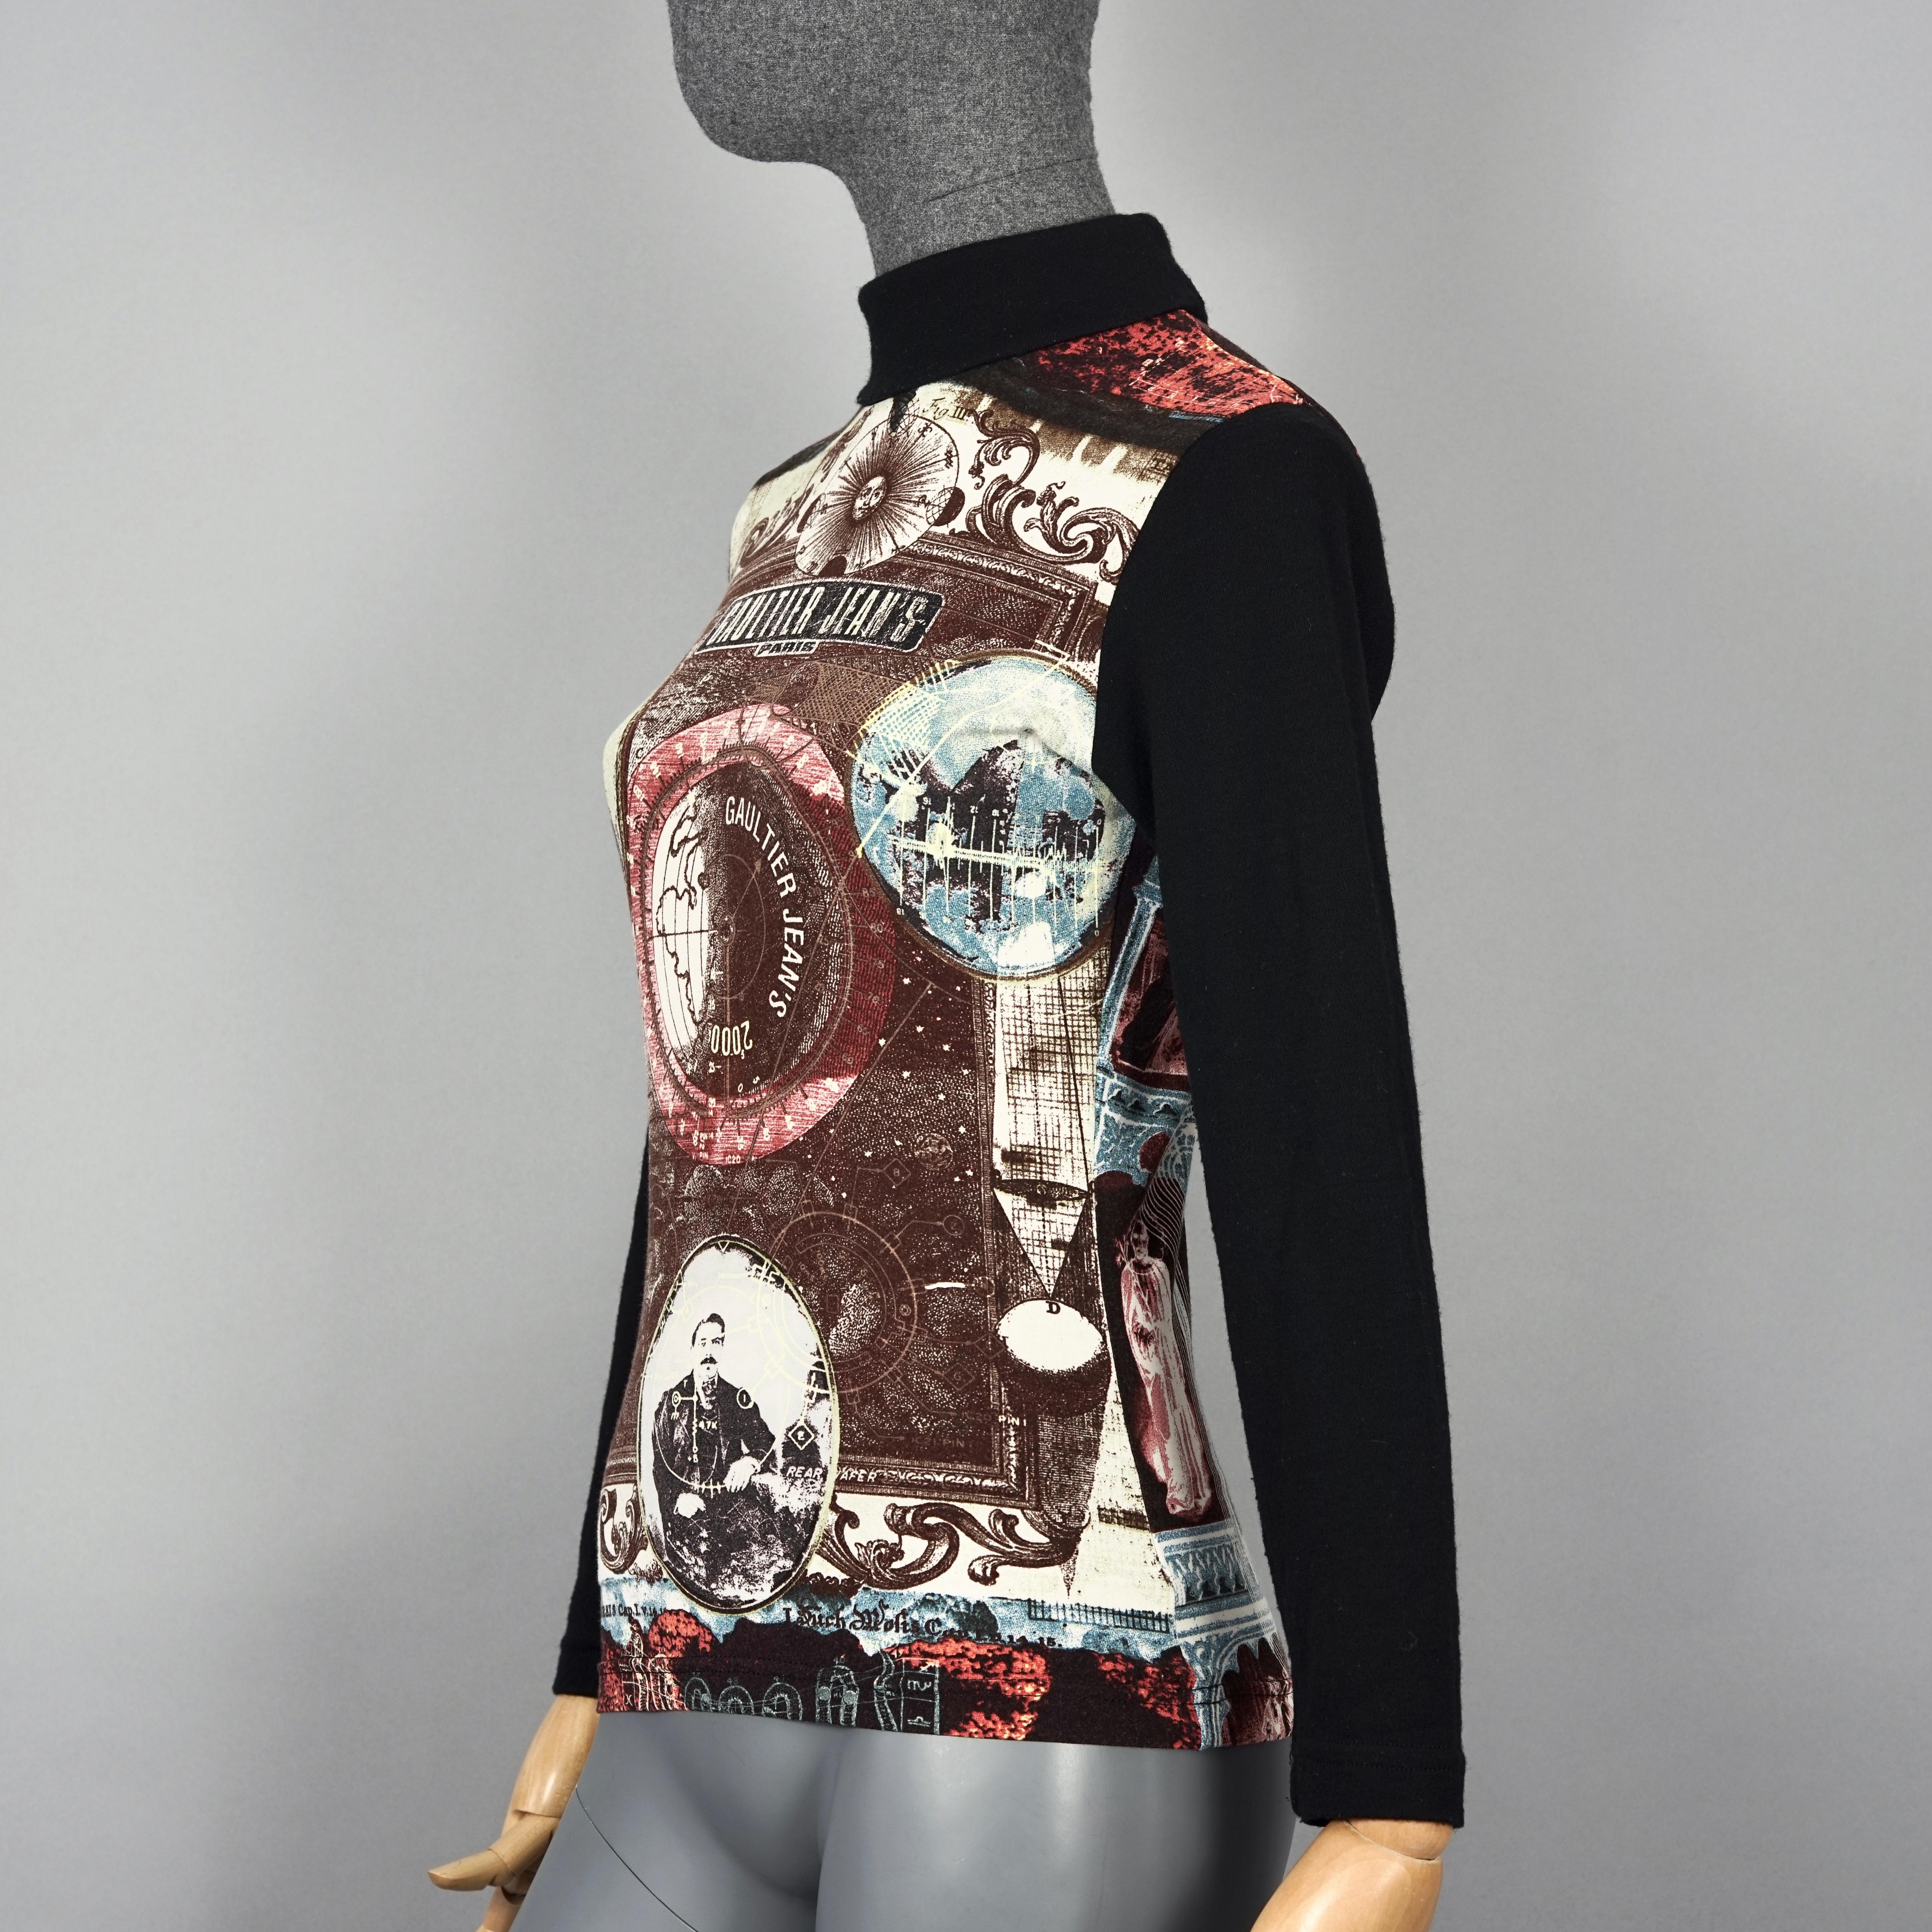 Vintage JEAN PAUL GAULTIER Novelty Collage Print Top In Good Condition For Sale In Kingersheim, Alsace